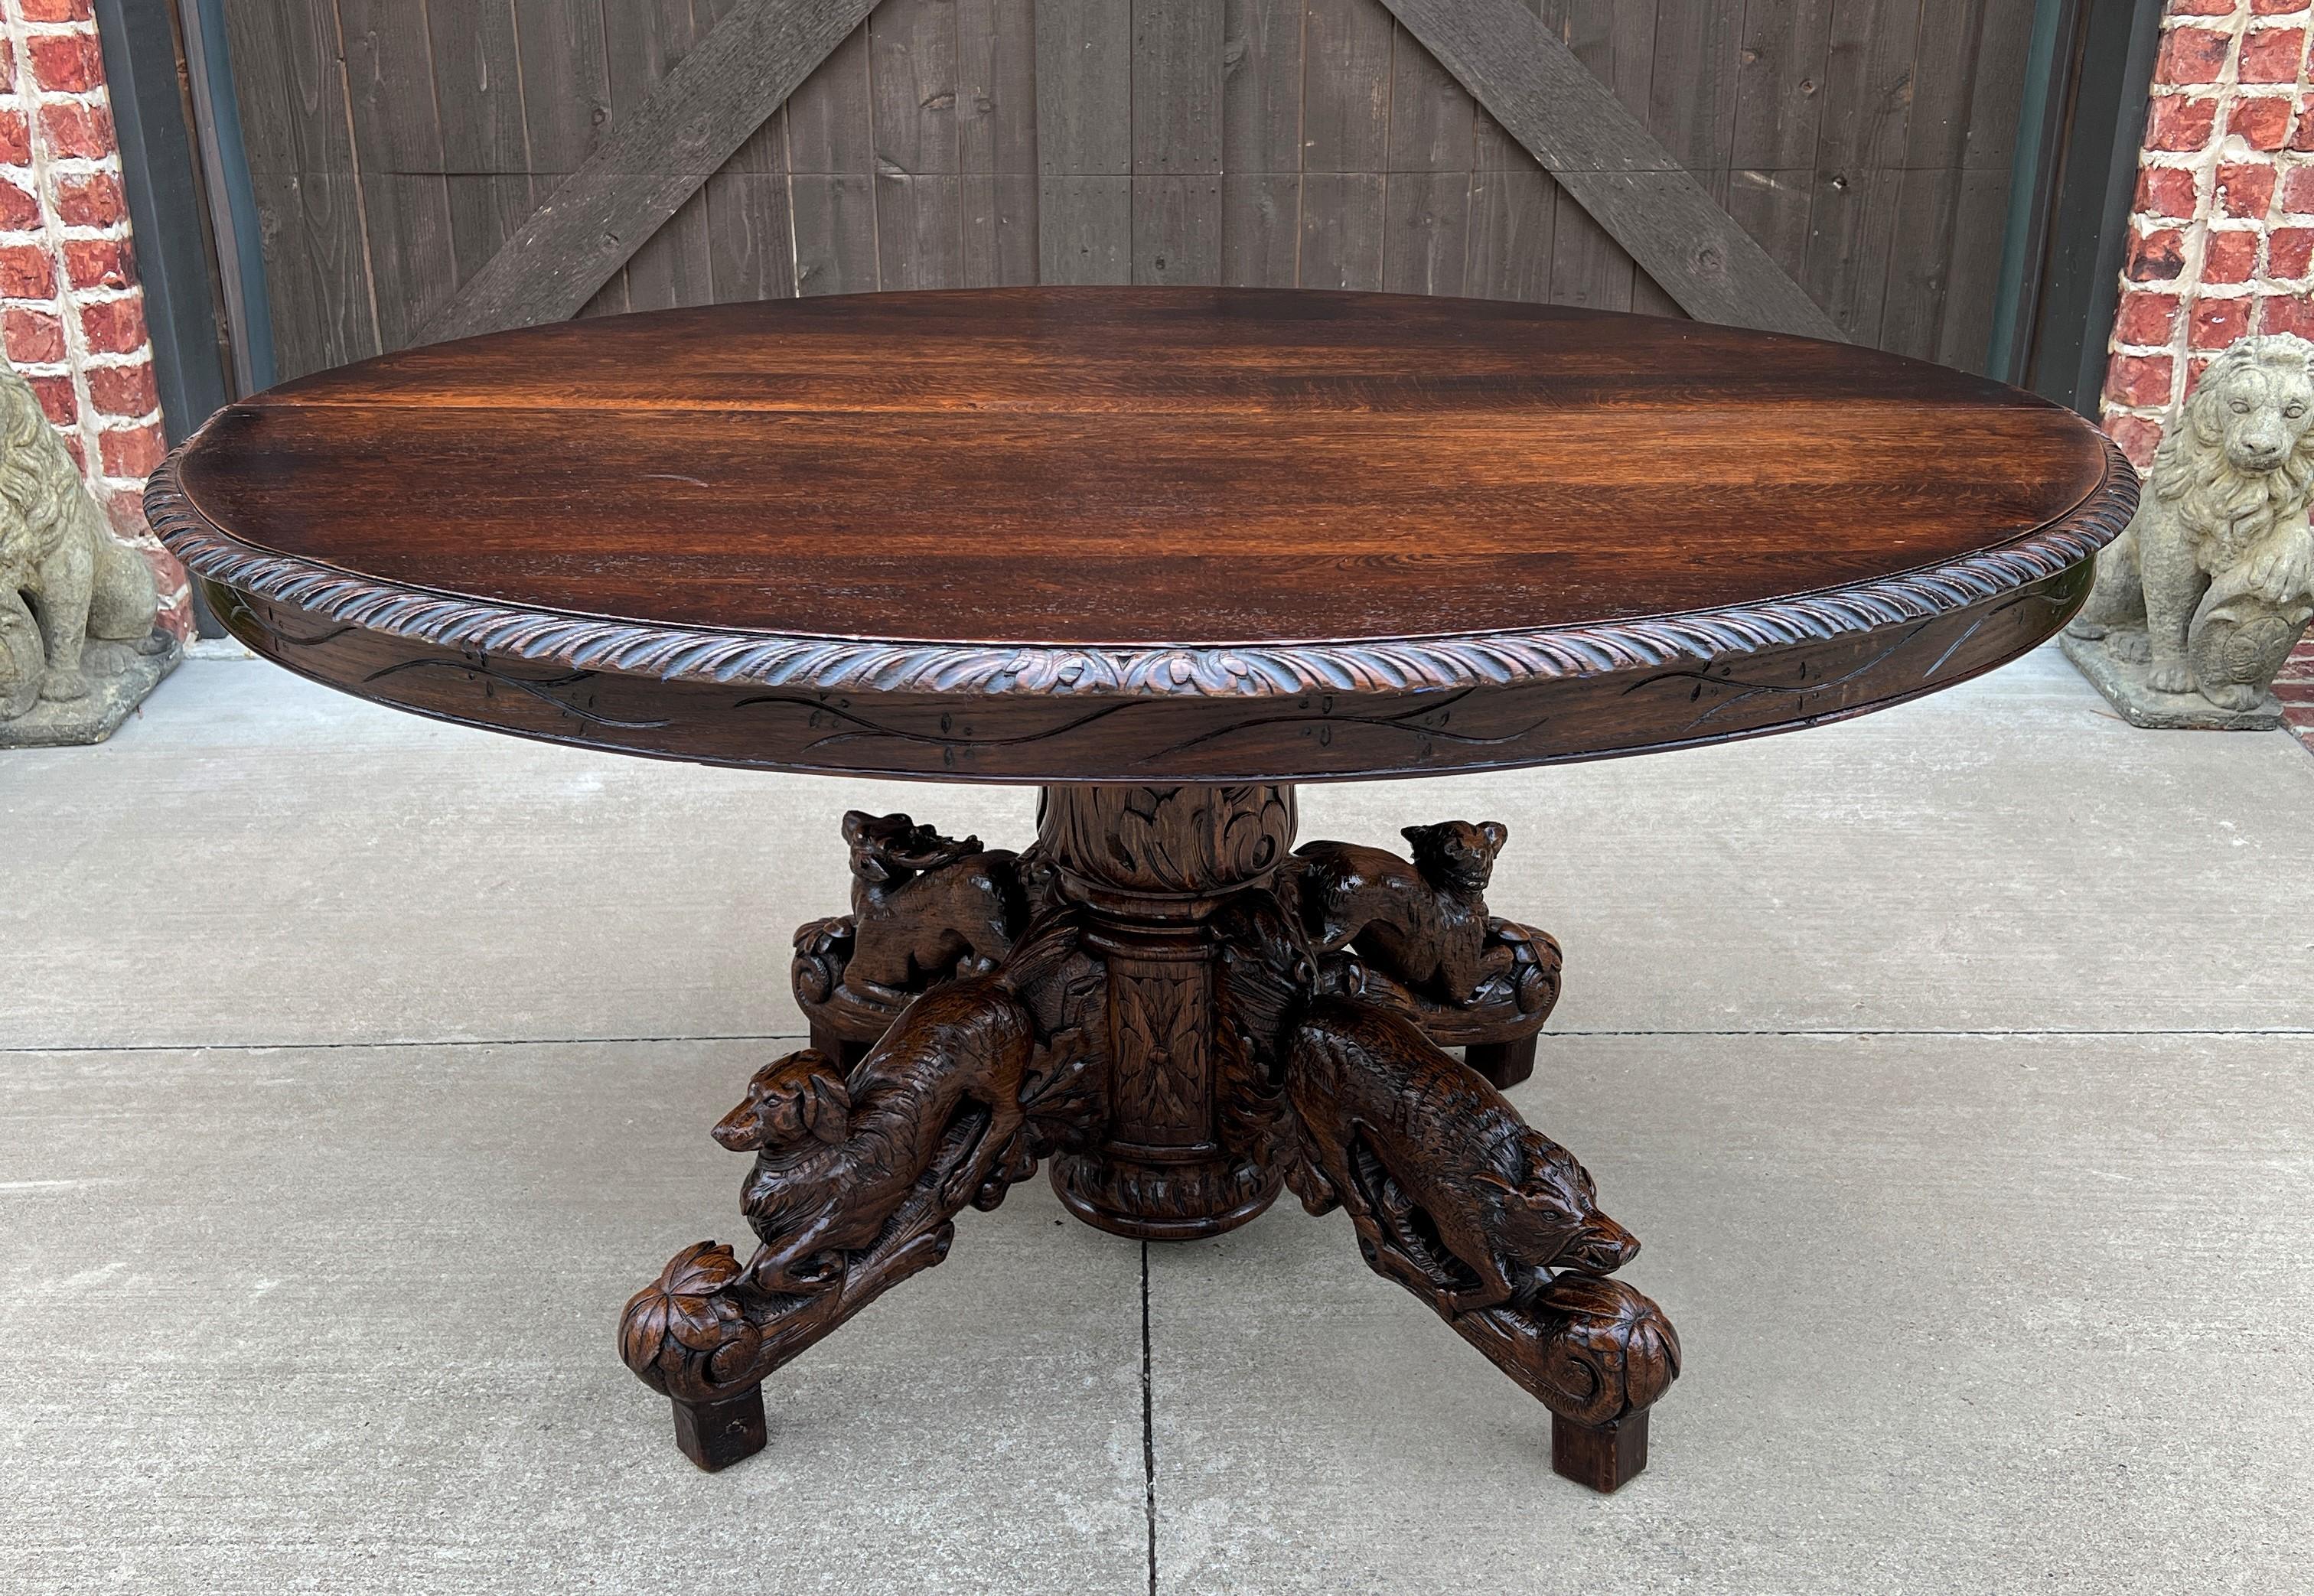 Antique French Oval Dining Library Table Pedestal Black Forest Hunt Table 19th C 1